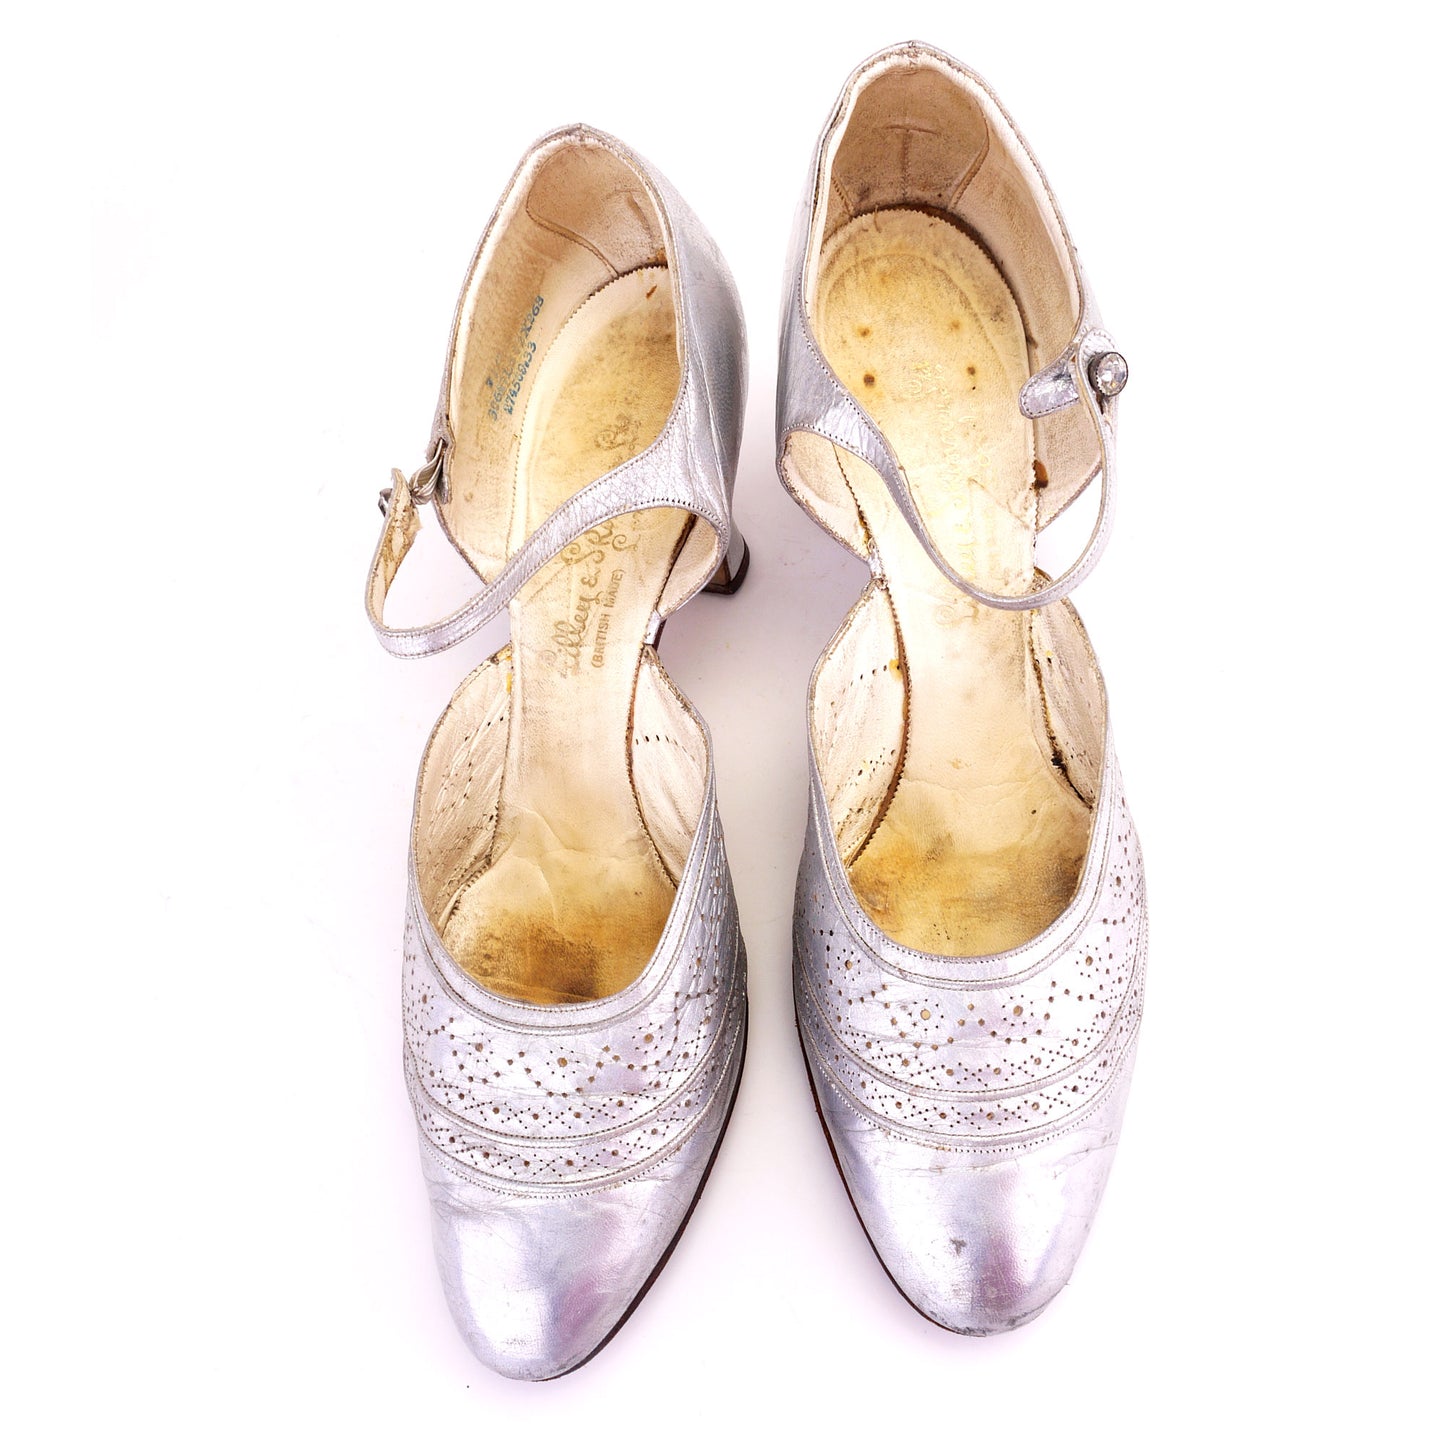 1930s Silver Dance Shoes by Lilley & Skinner UK 7.5